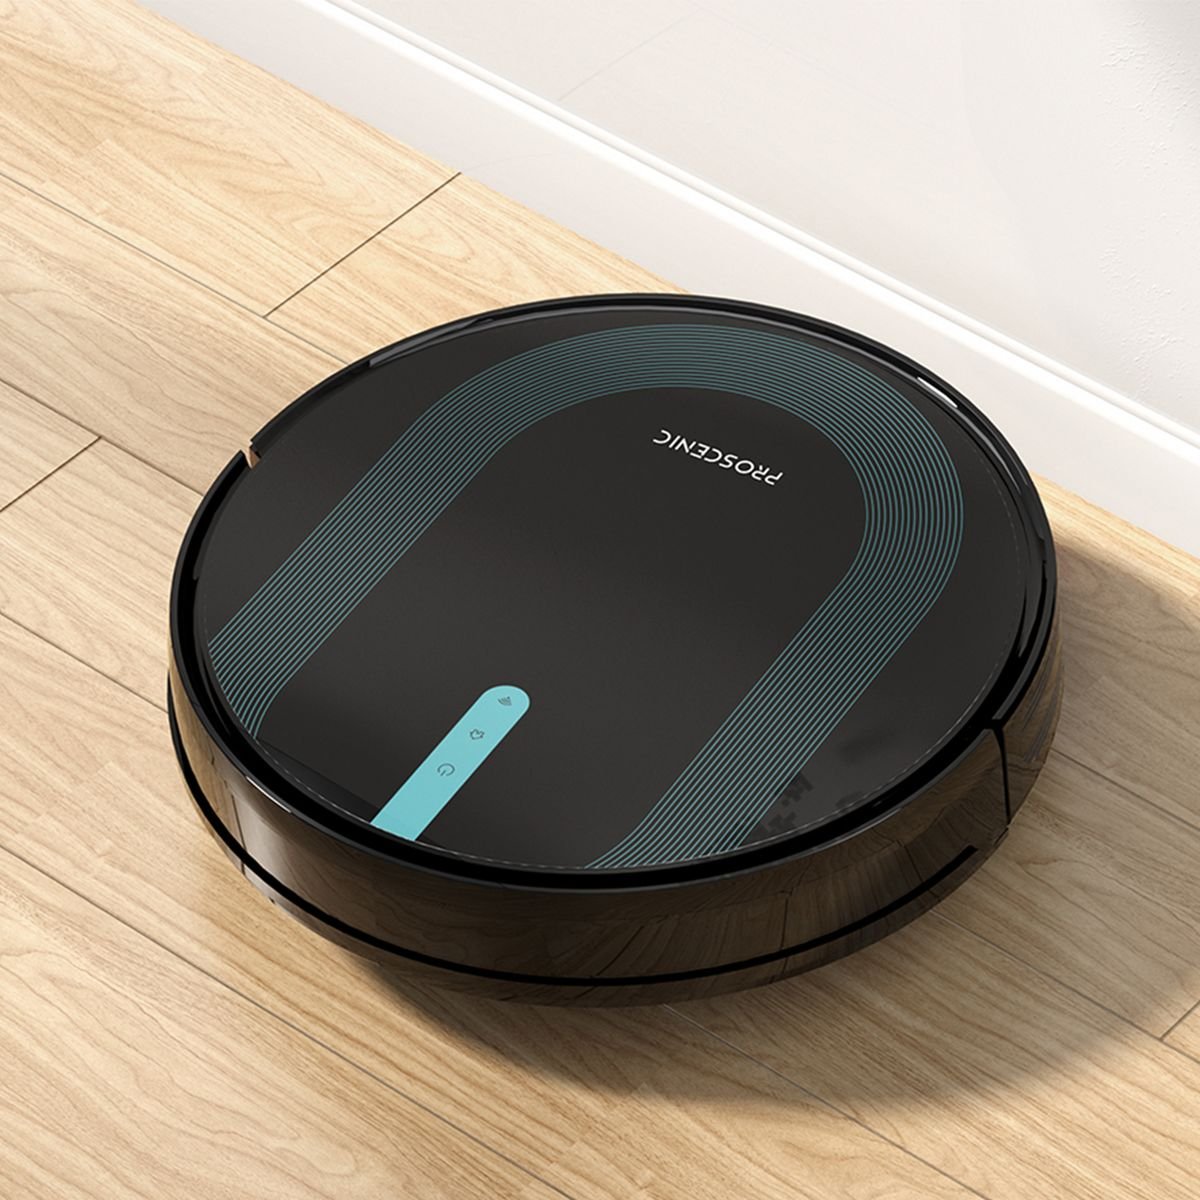 Need a quick way to vacuum and mop? Try the Proscenic 850T Robot Vacuum